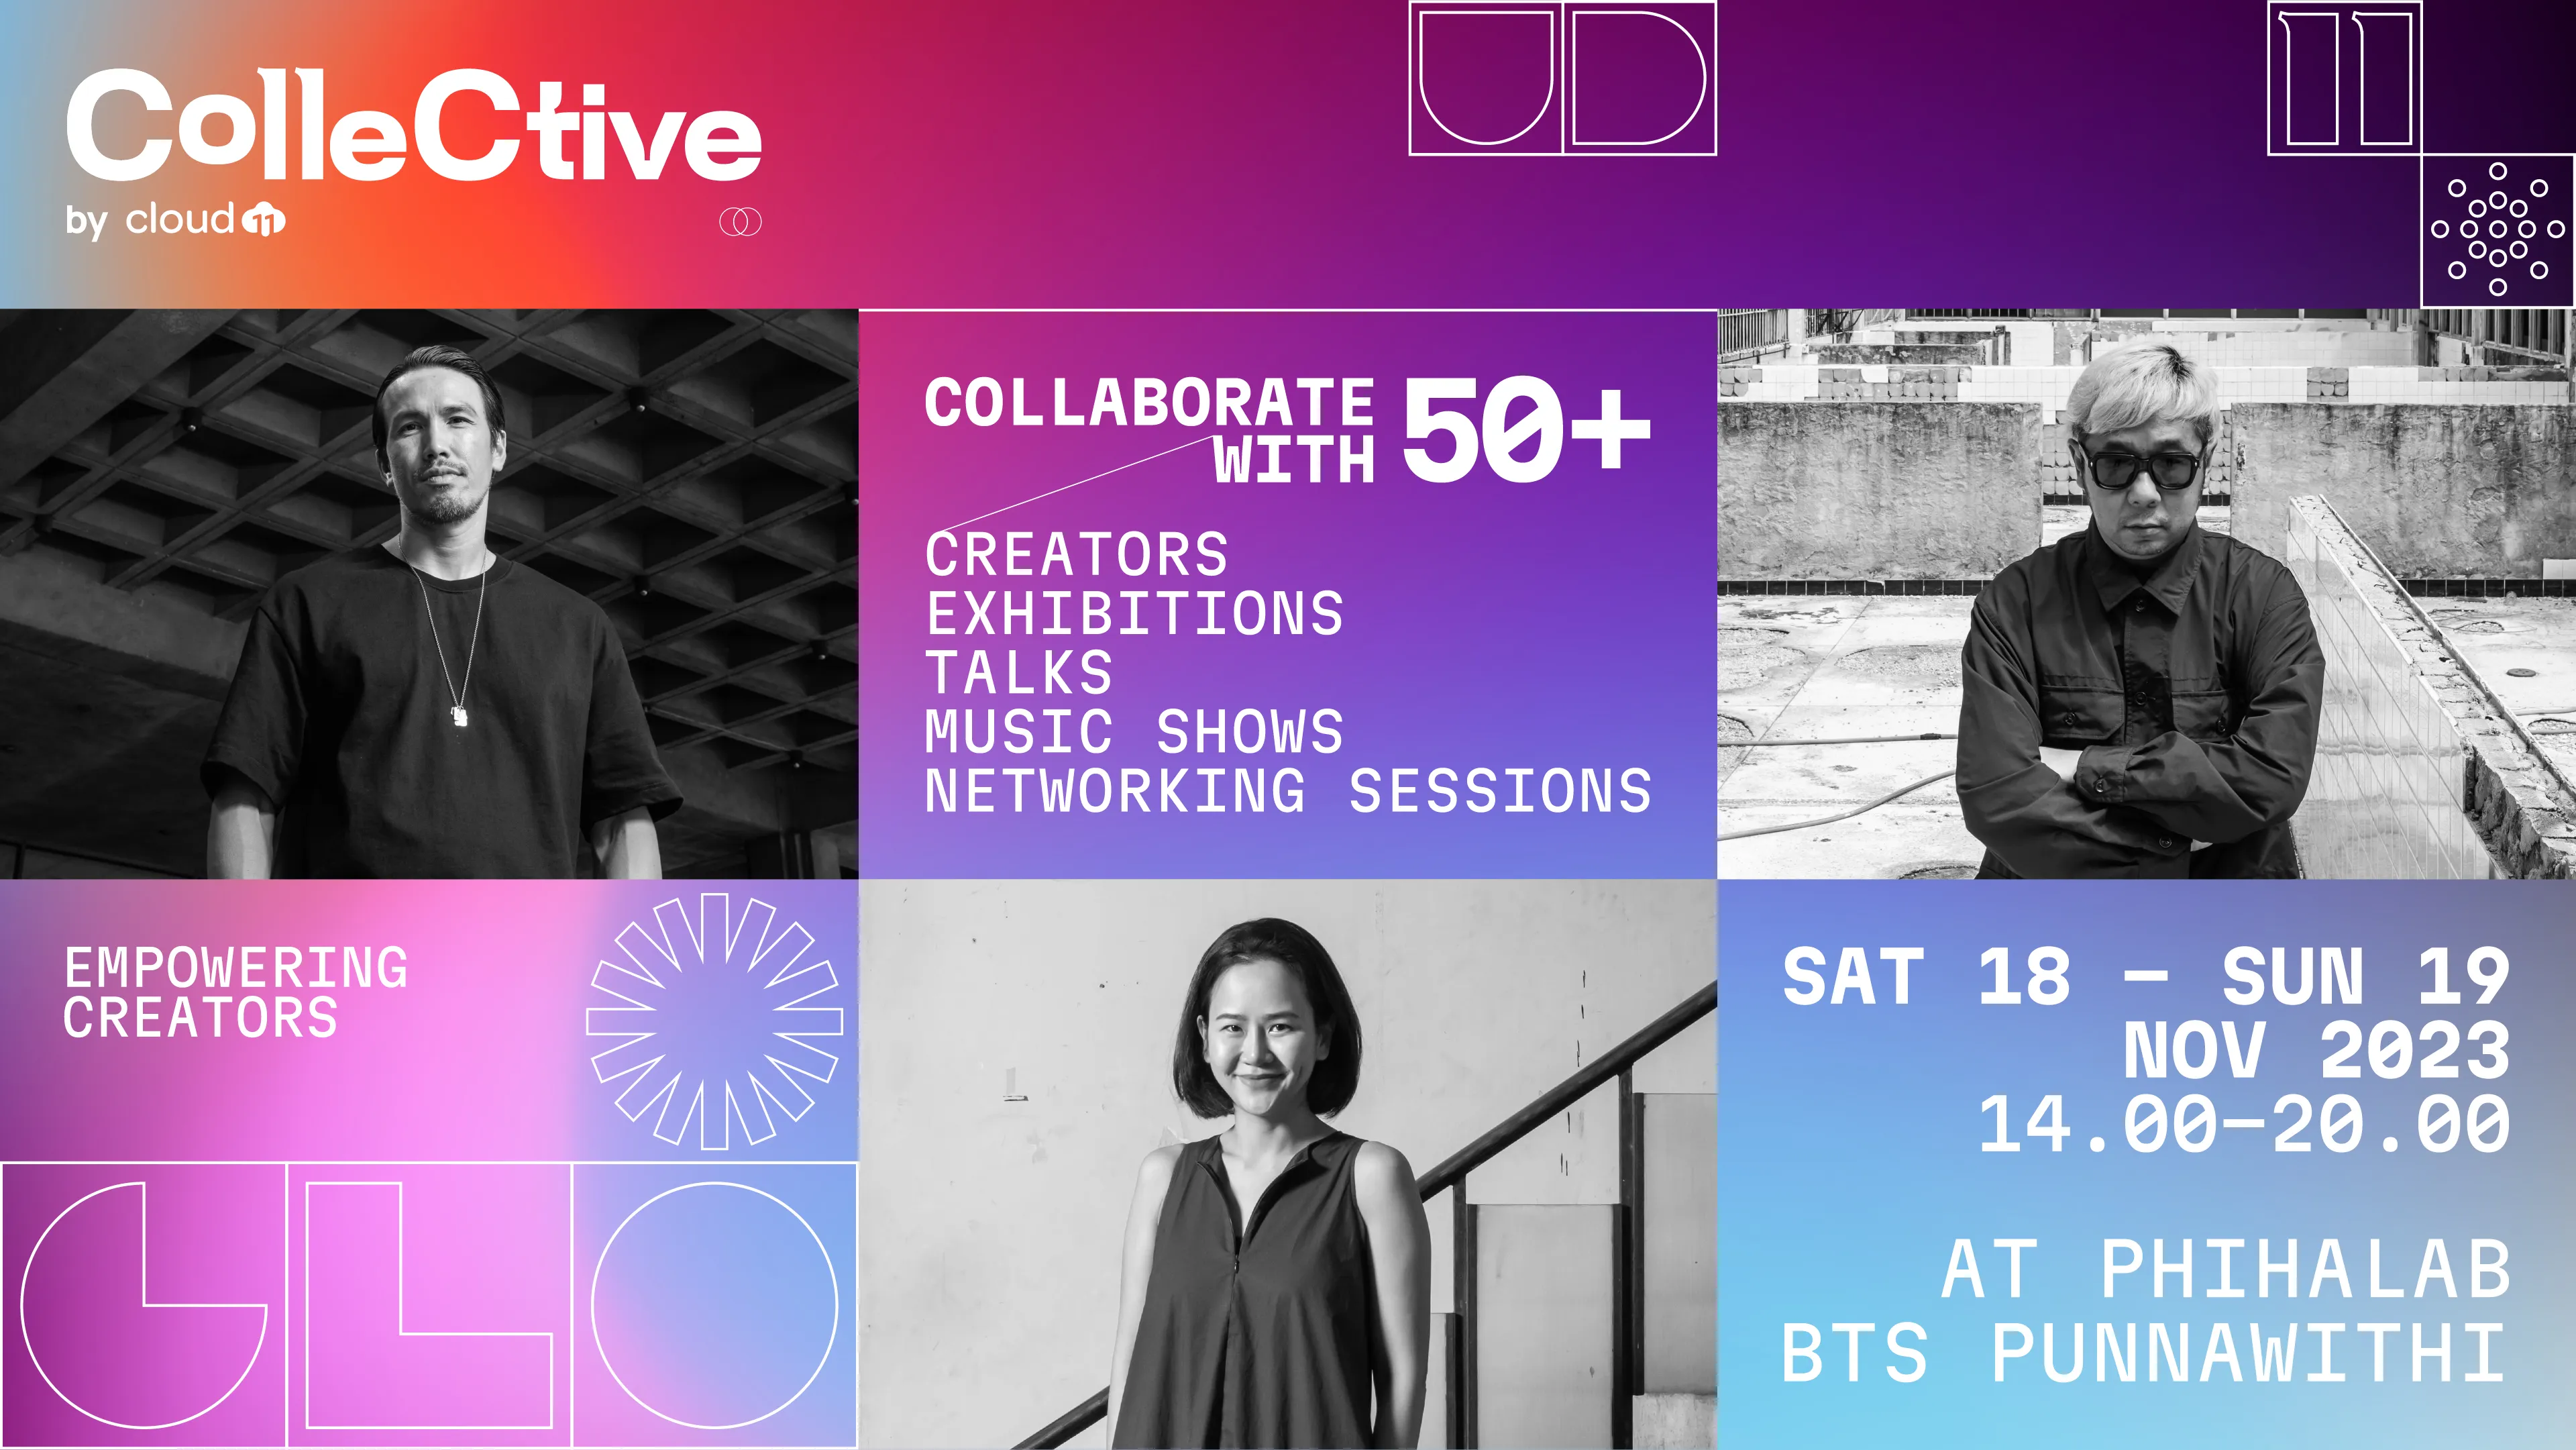 Get ready for the debut of the new phase of creators at the Collective by Cloud 11 event